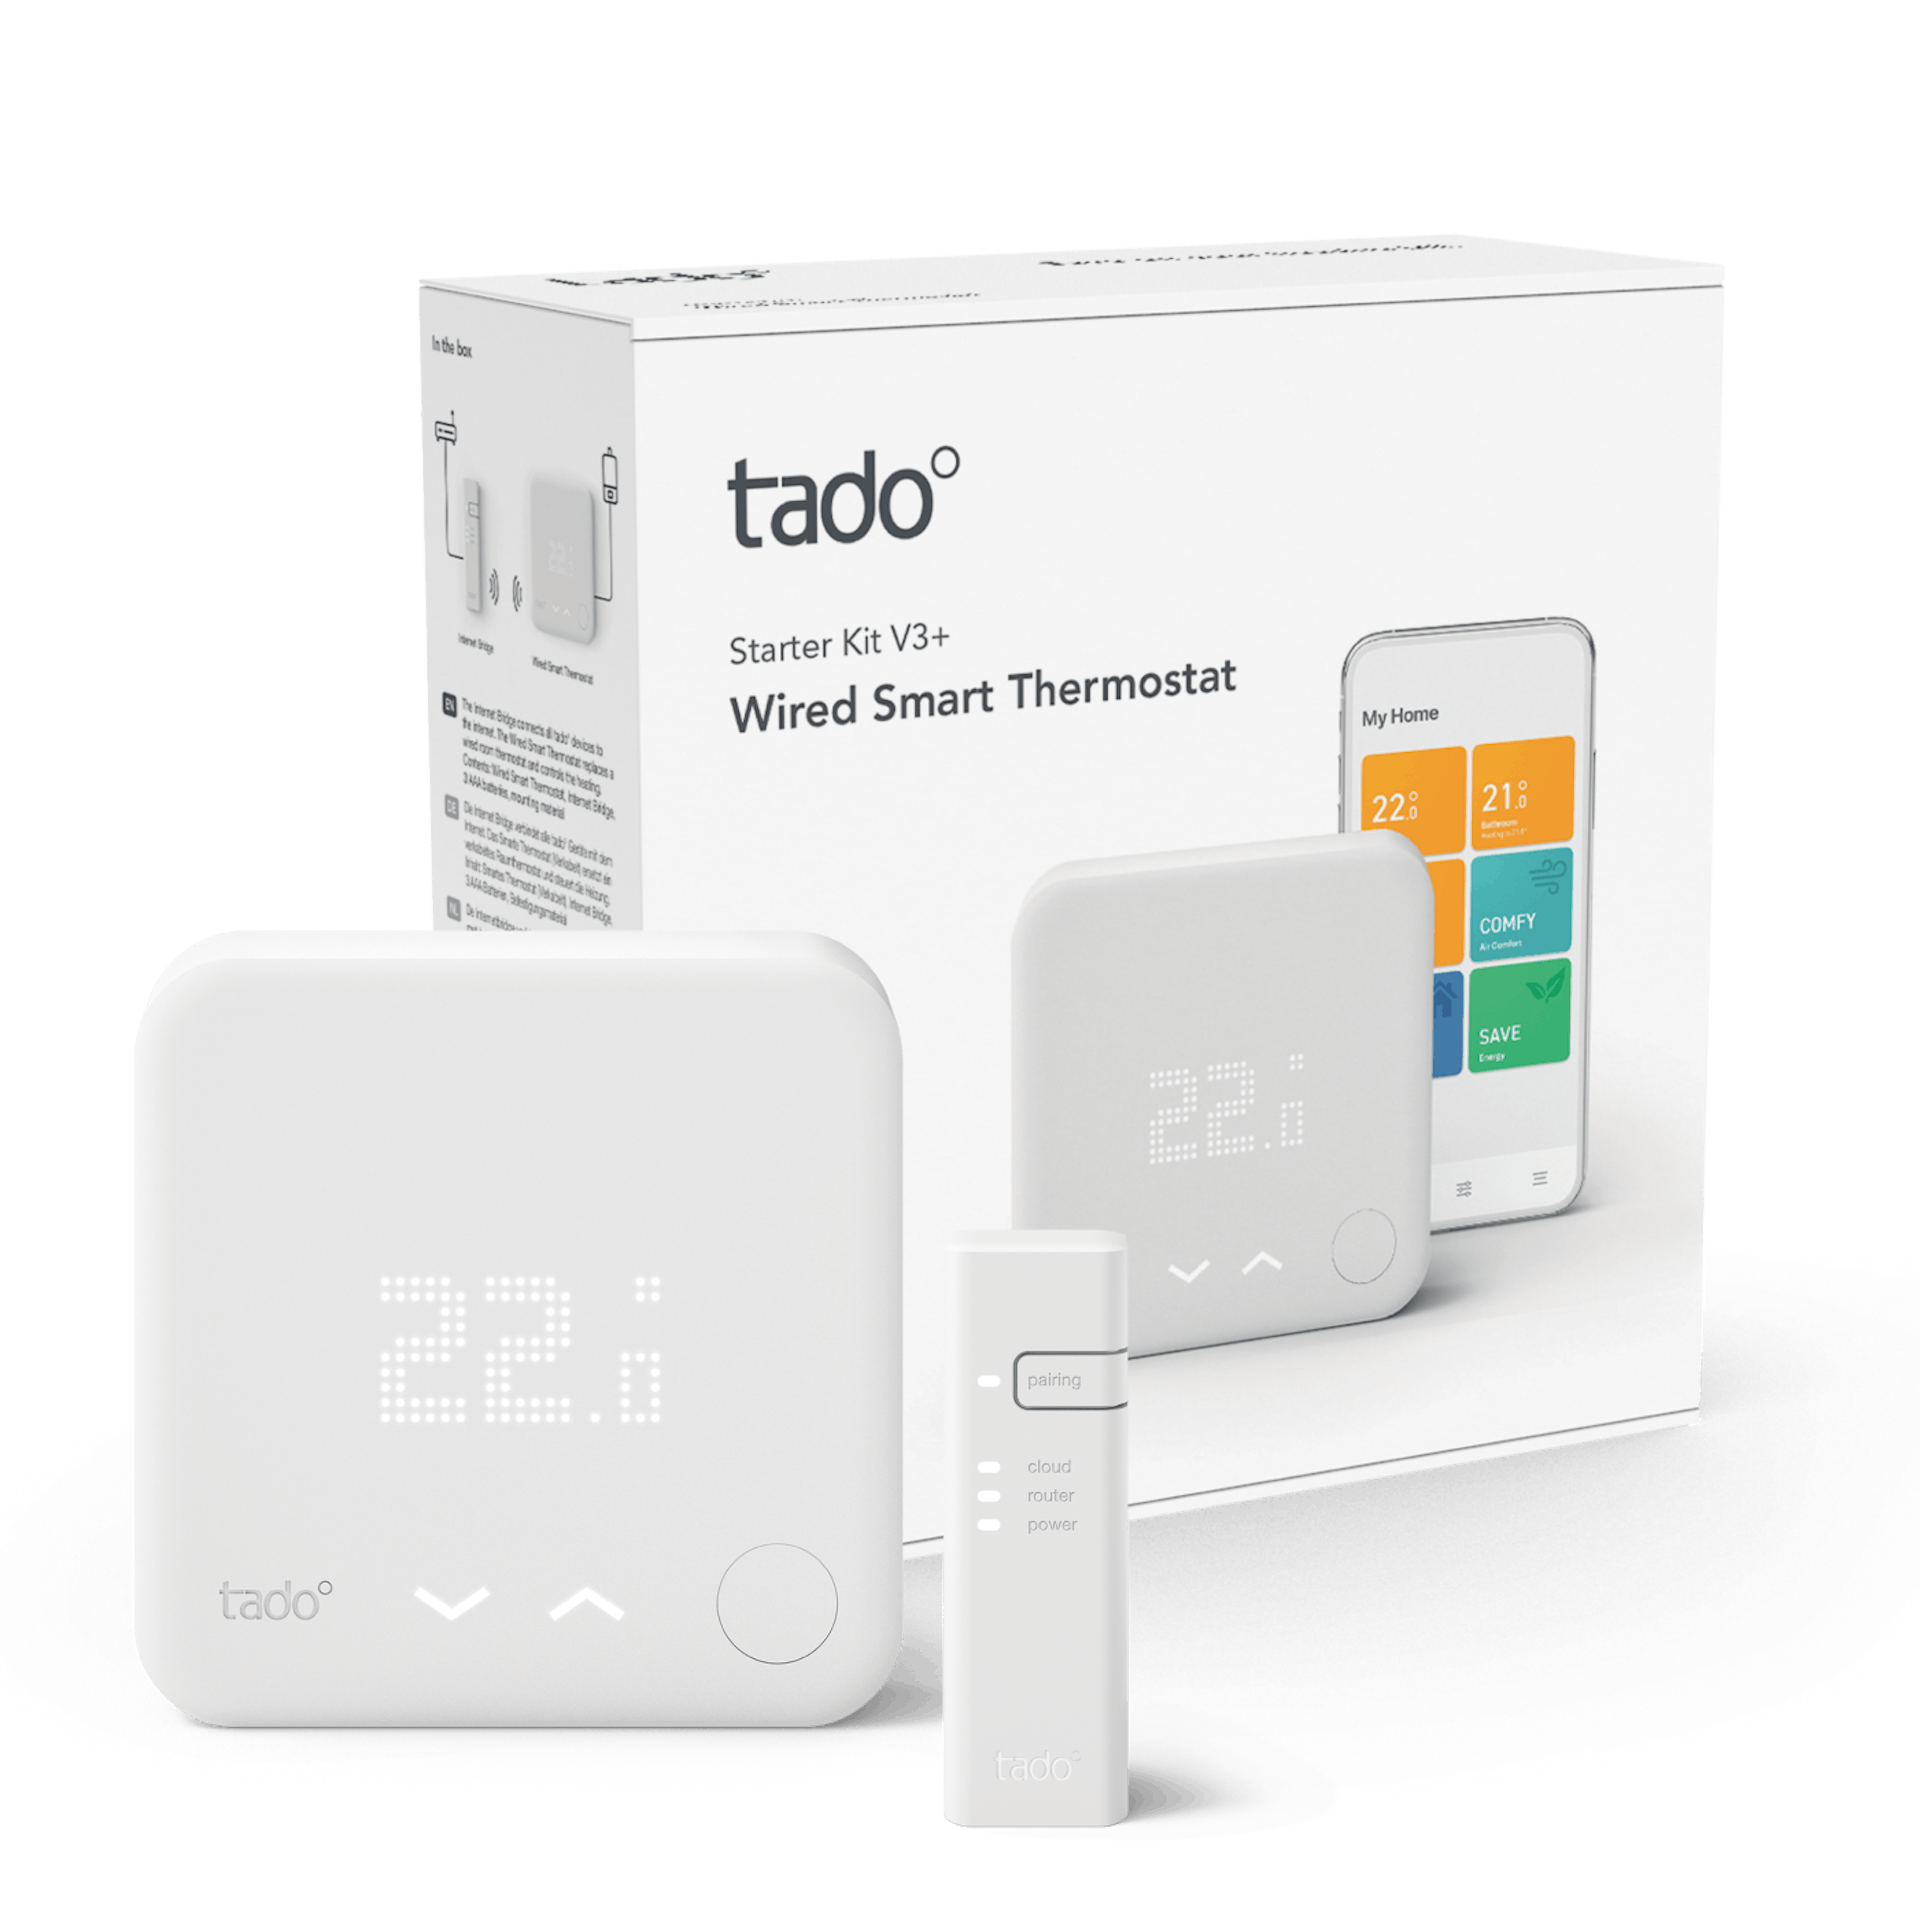 Tado - Wired Smart Thermostat V3+ - Packaging image